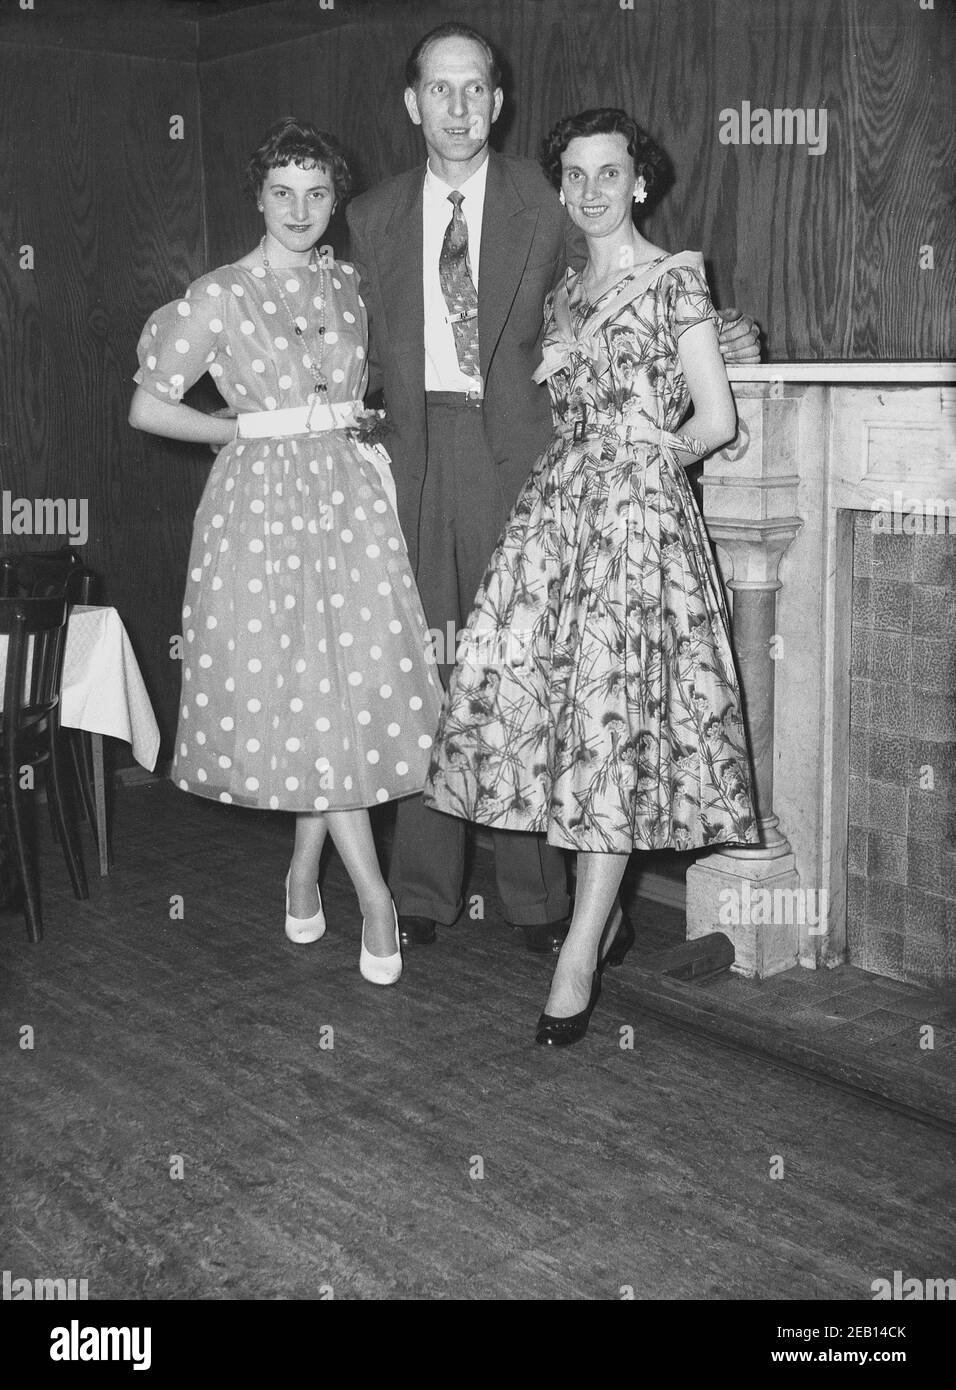 1950s, historical, young lady in a spotted or polka dot dress fashionable in this era standing for a picture with a couple at her birthday pary in a hotel function room, England, UK. Stock Photo